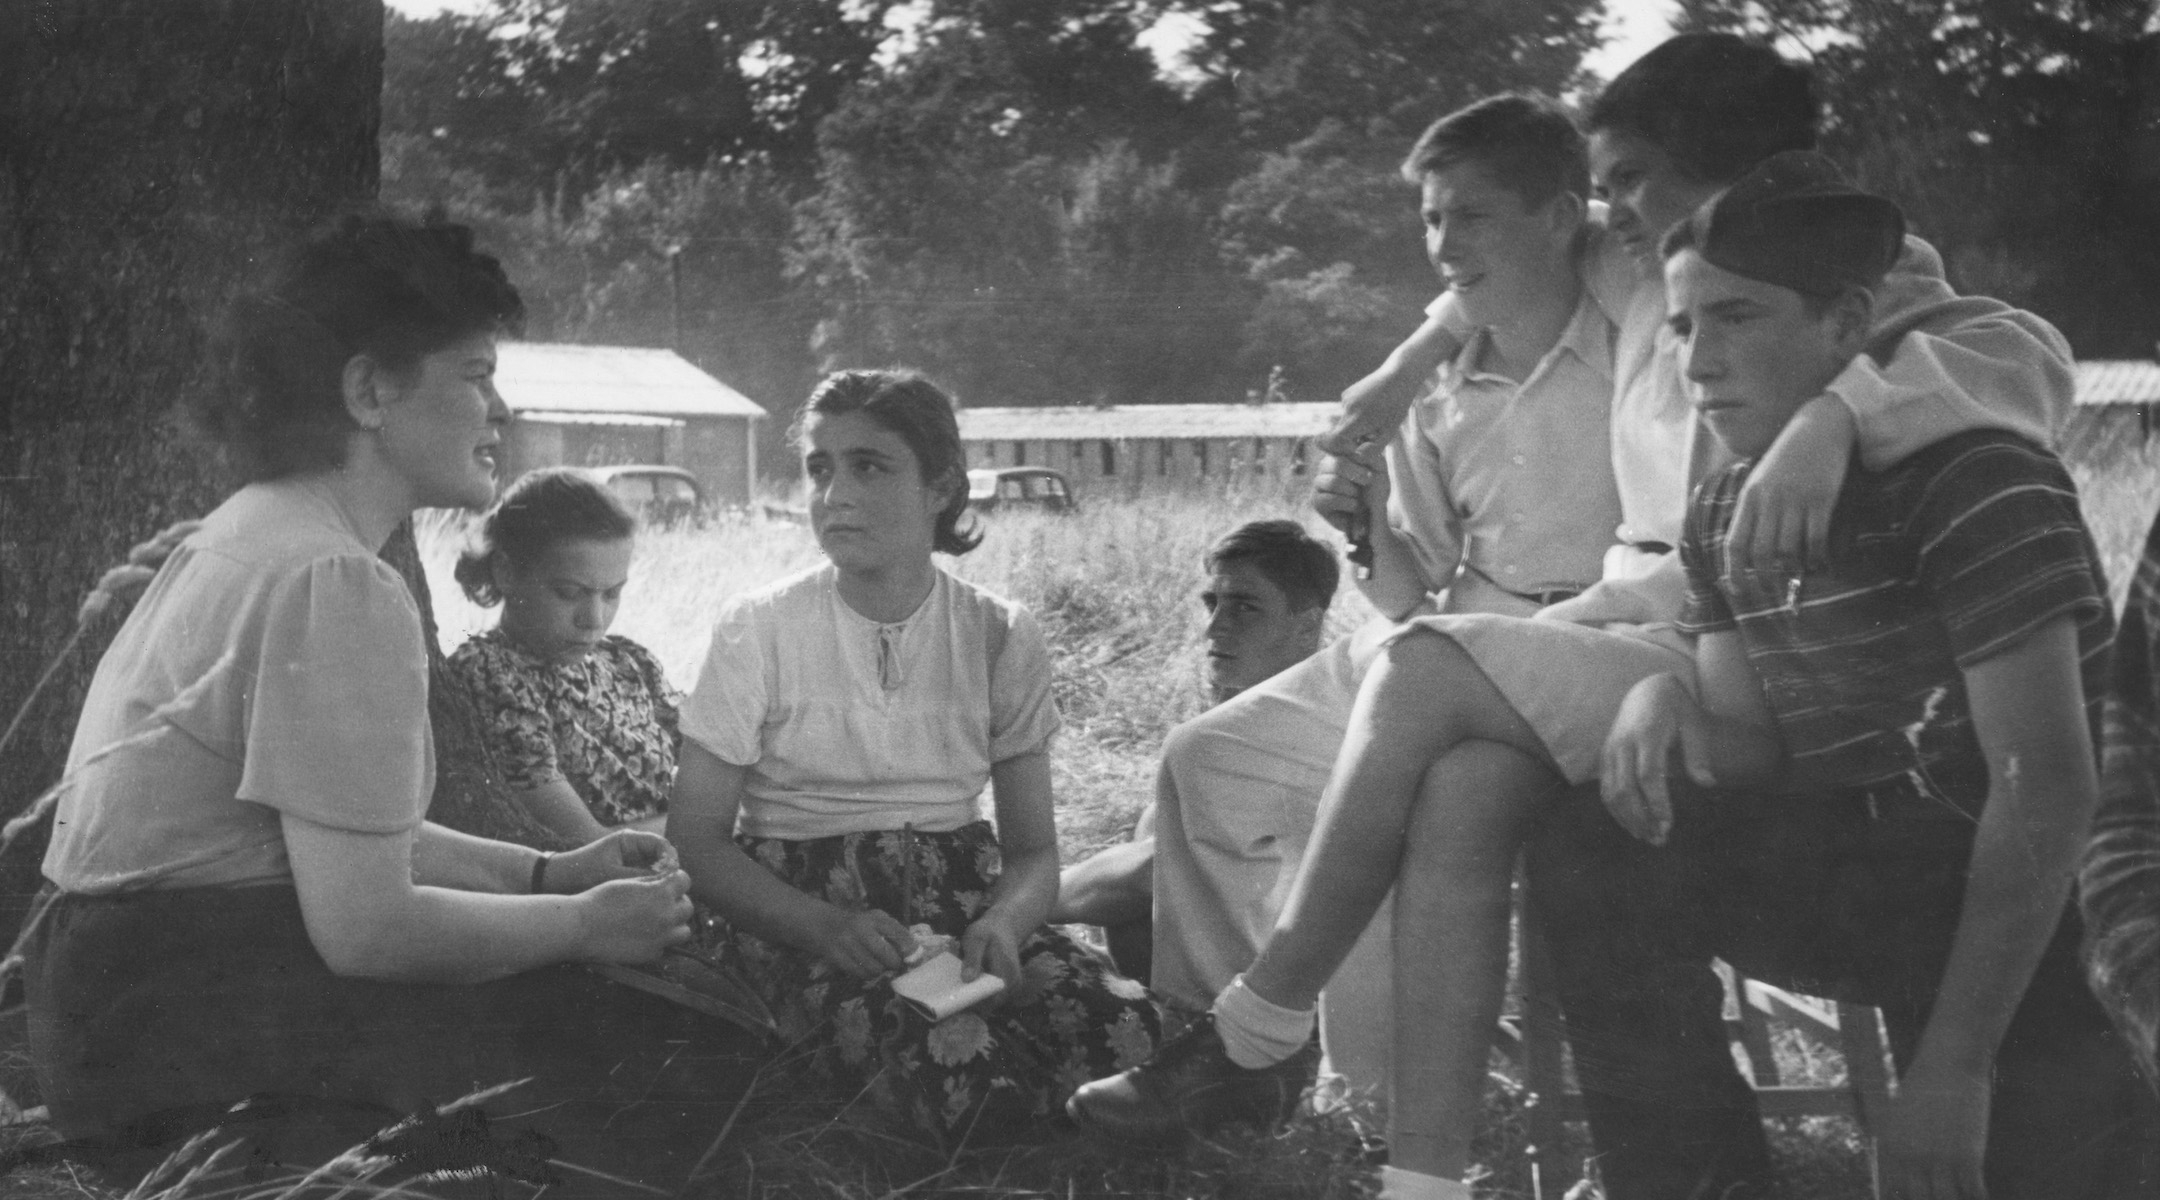 Young Jewish refugees at a camp near Windermere in England, 1946. Laws passed after World War II shaped the United States' refugee admission program. (Kurt Hutton/Getty Images)